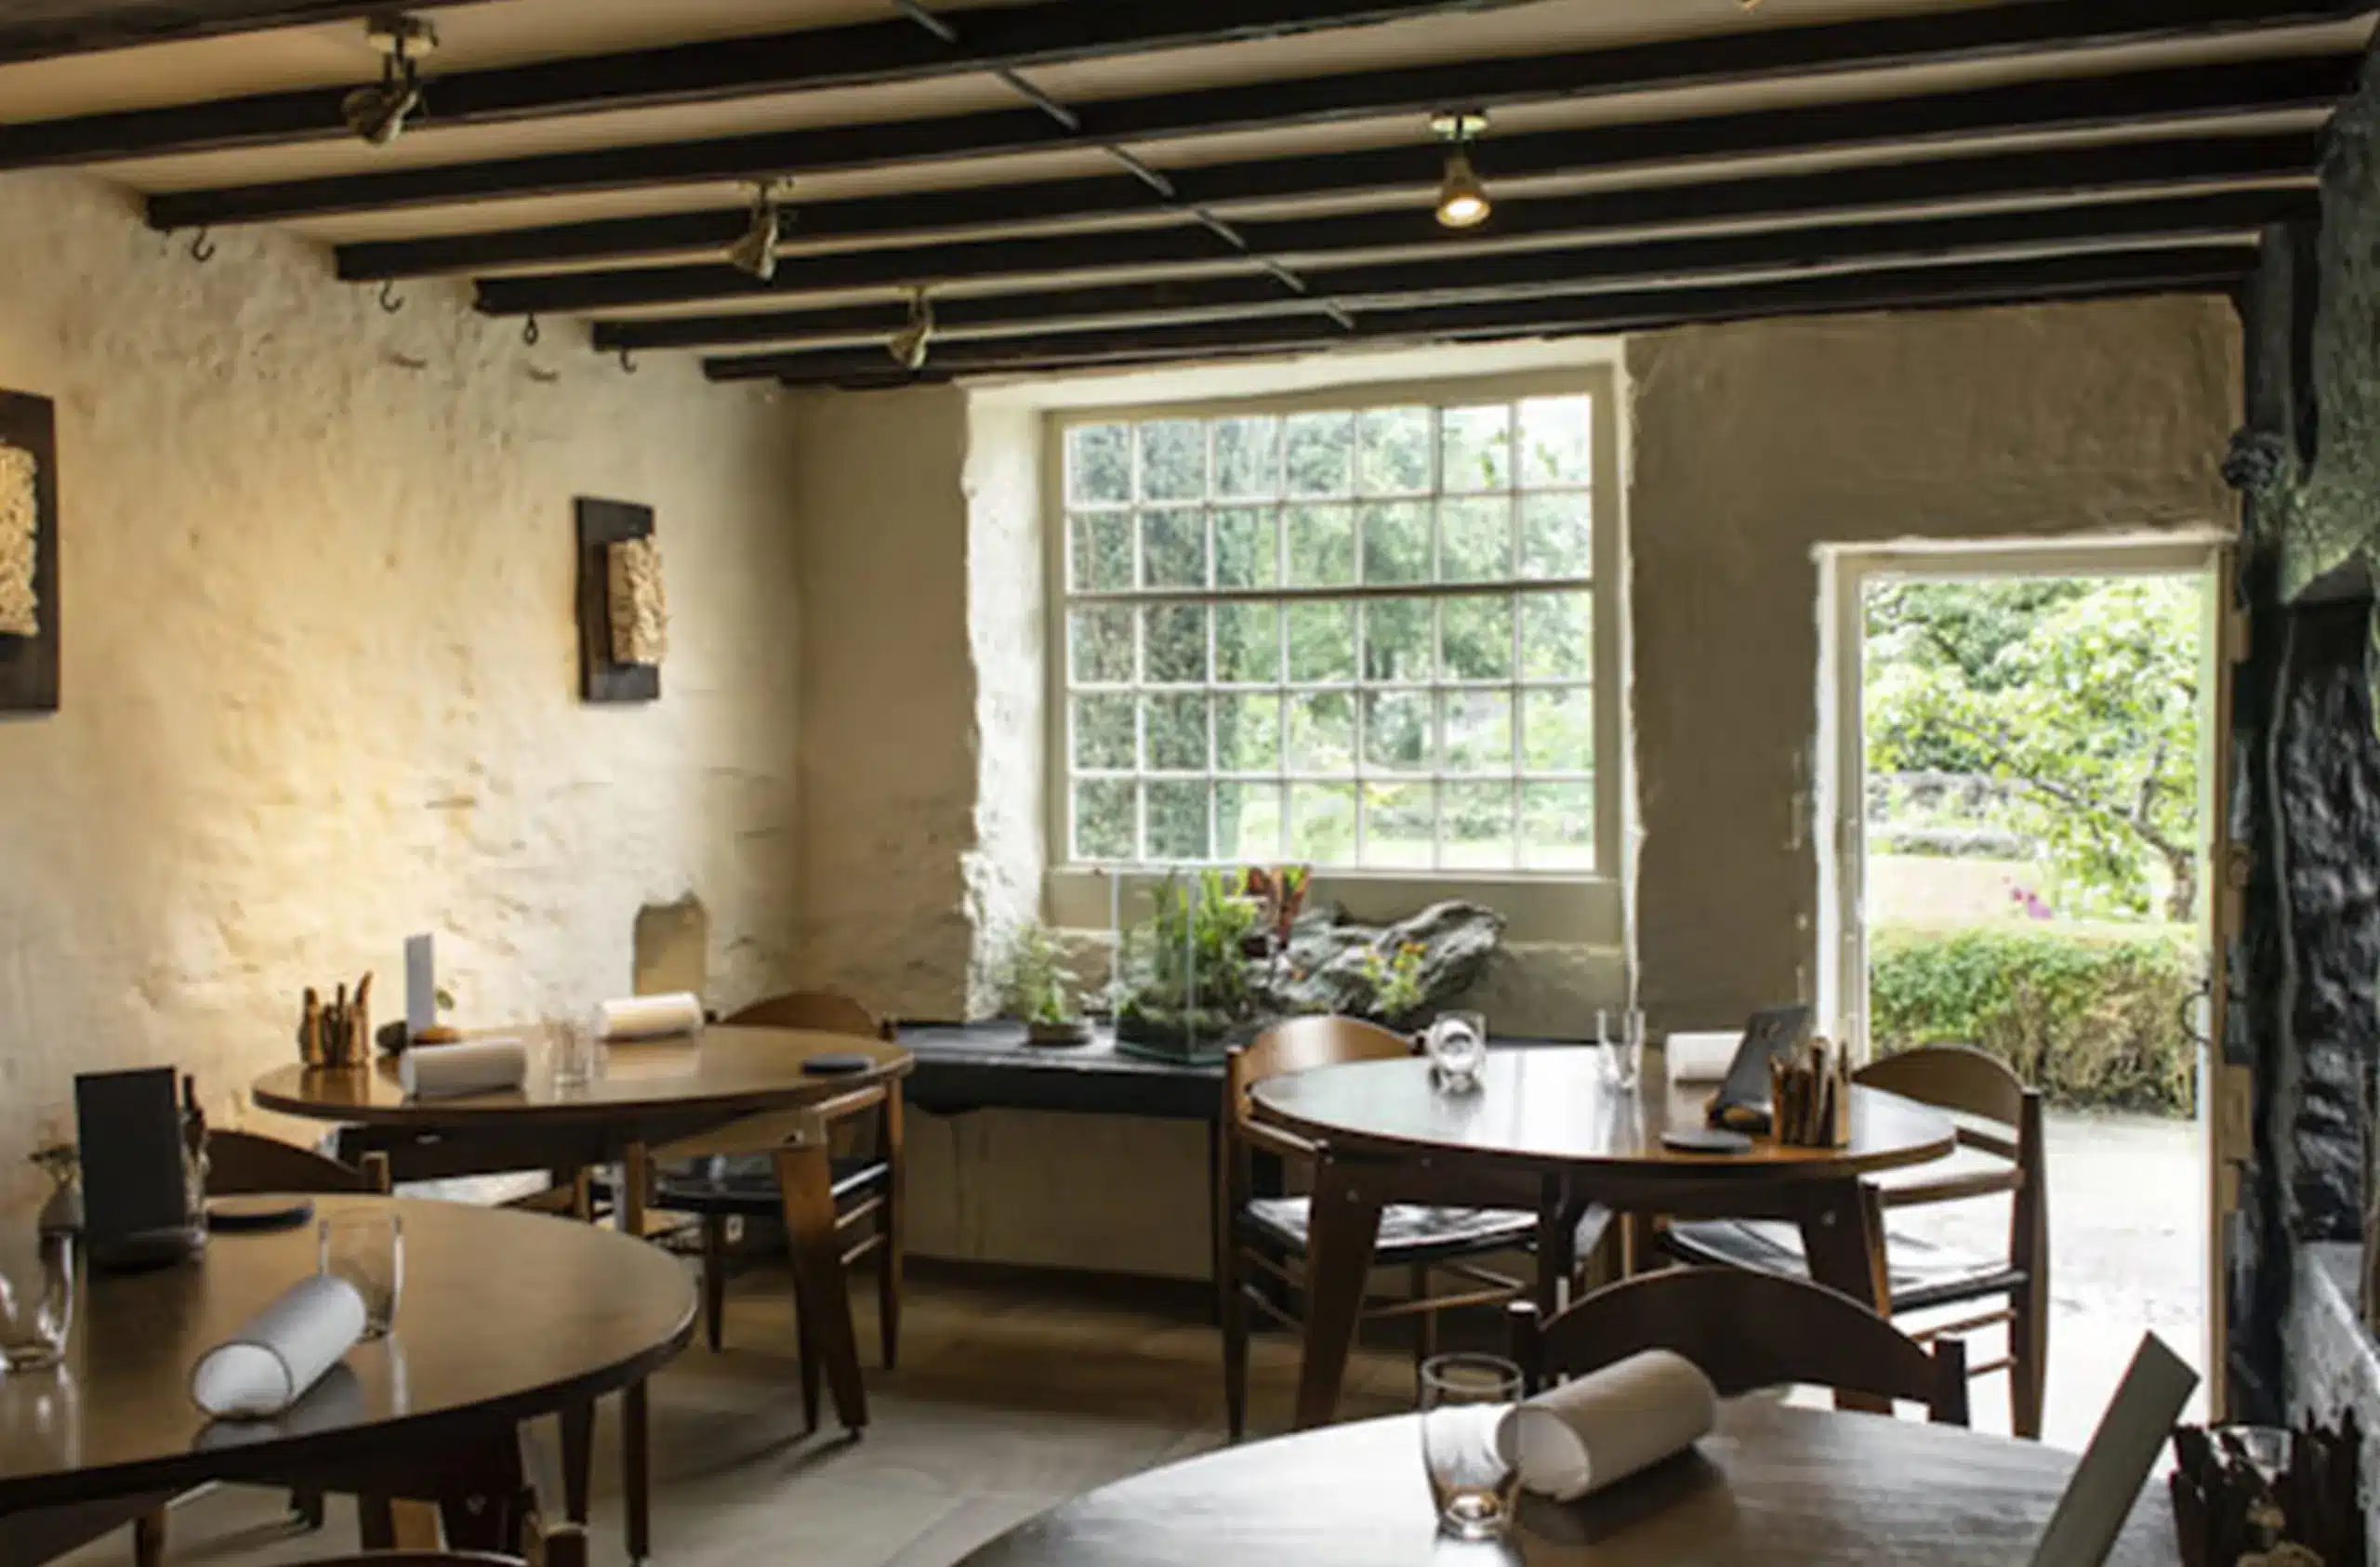 L'Enclume a fine dining michelin star experience in the lake district, country accommodation near nice restaurants